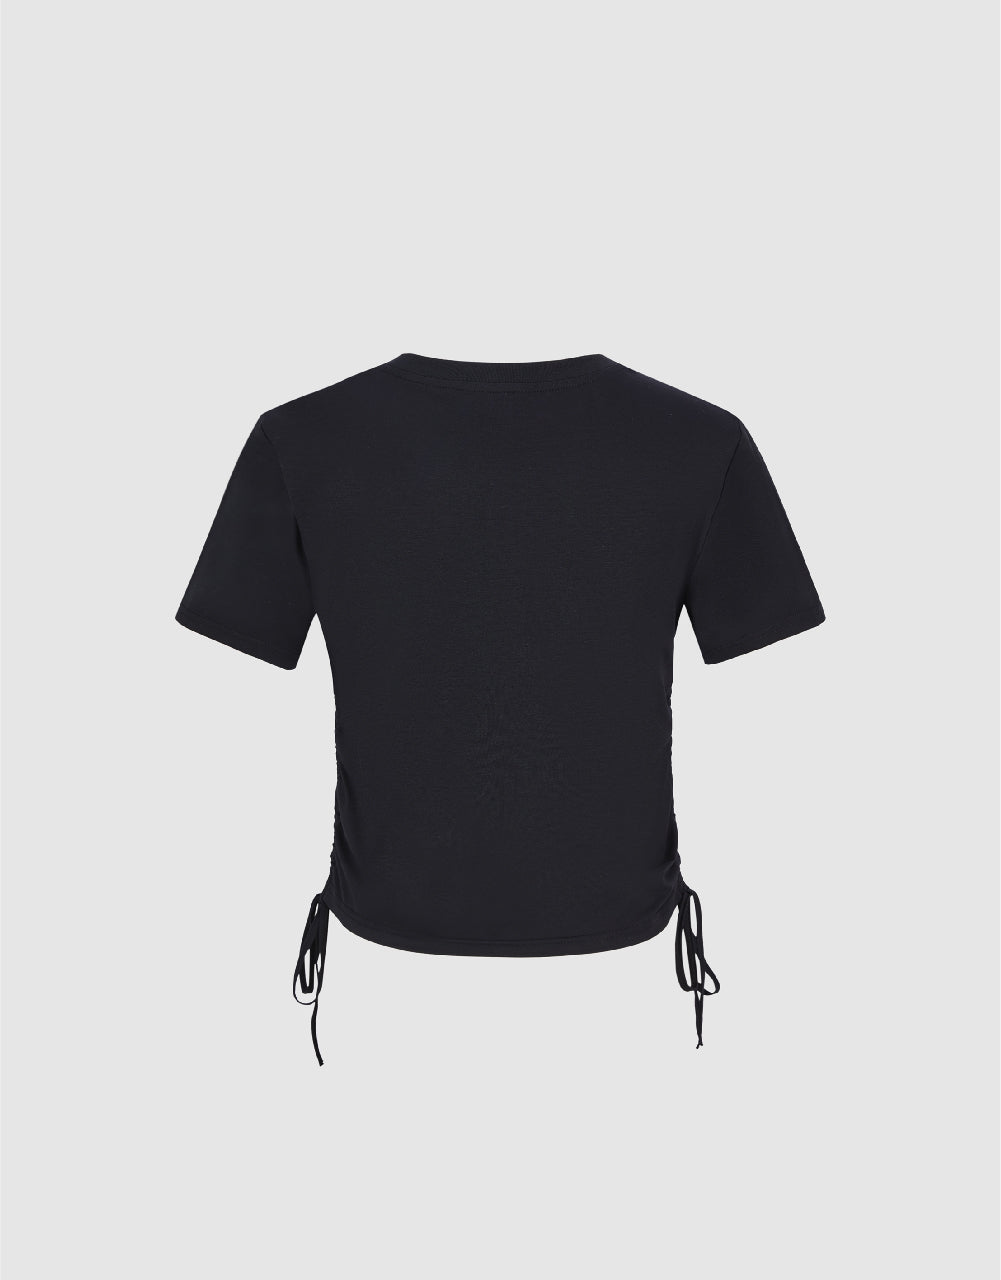 Lace Up Side Skinny T-Shirt